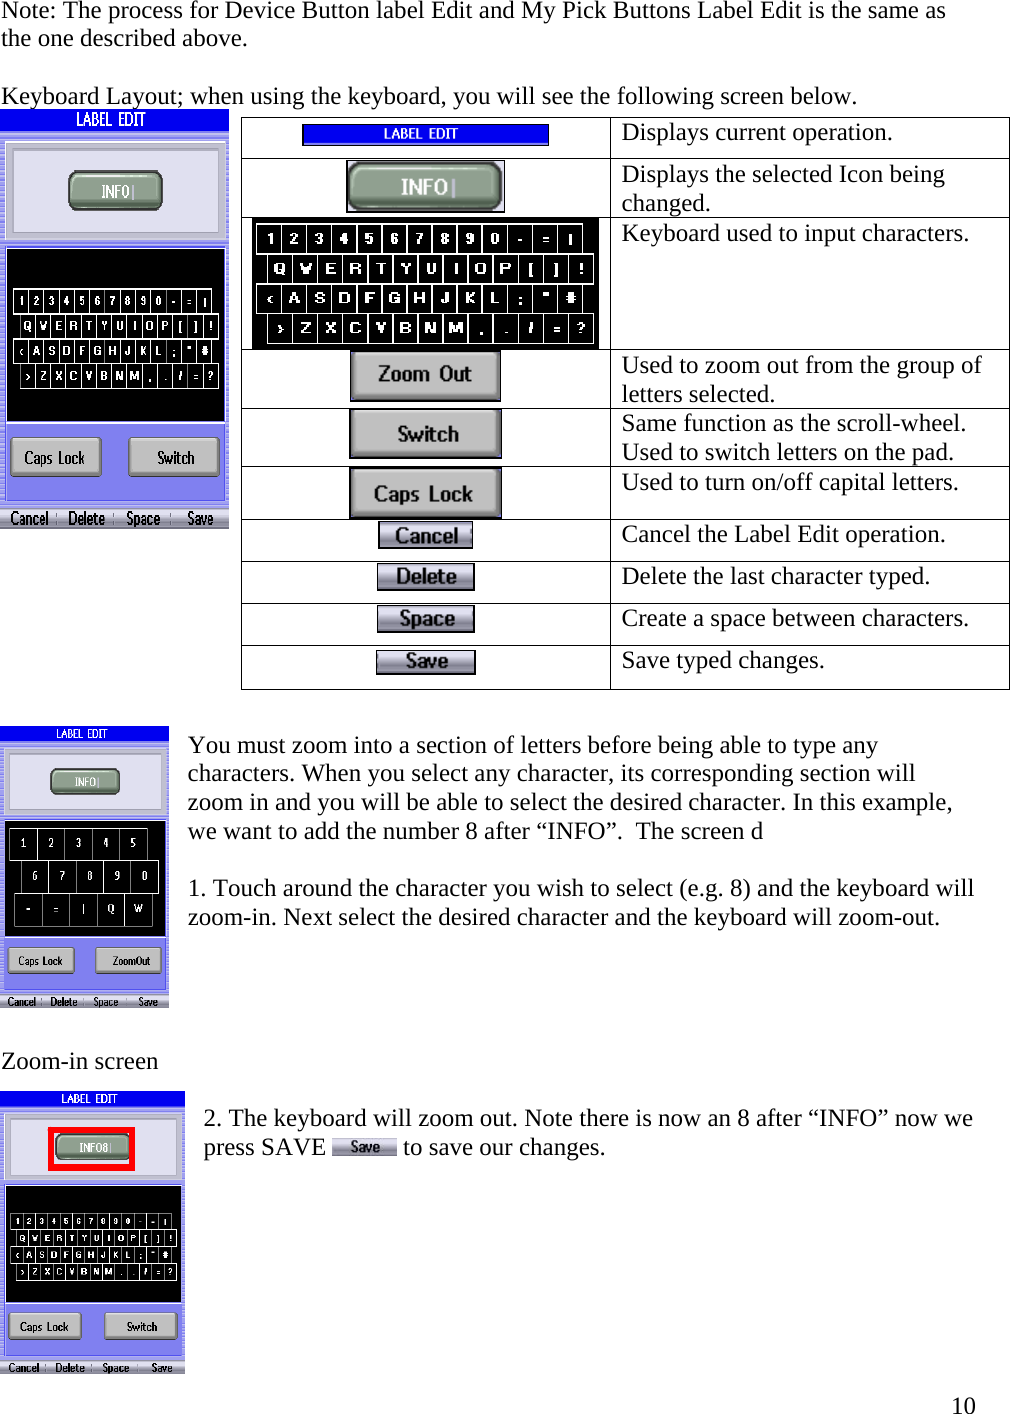 Note: The process for Device Button label Edit and My Pick Buttons Label Edit is the same as the one described above.  Keyboard Layout; when using the keyboard, you will see the following screen below.   Displays current operation.                                                                    You must zoom into a section of letters before being able to type any characters. When you select any character, its corresponding section will zoom in and you will be able to select the desired character. In this example, we want to add the number 8 after “INFO”.  The screen d  1. Touch around the character you wish to select (e.g. 8) and the keyboard will zoom-in. Next select the desired character and the keyboard will zoom-out.       Zoom-in screen   2. The keyboard will zoom out. Note there is now an 8 after “INFO” now we press SAVE   to save our changes.         ing Displays the selected Icon bechanged. Keyboard used to input characters.  Used to zoom out from the group of letters selected.   the scroll-wheel. Same function asUsed to switch letters on the pad. Used to turn on/off capital letters.   Cancel the Label Edit operation.  Delete the last character typed. Create a space between characters.  Save typed changes.   10